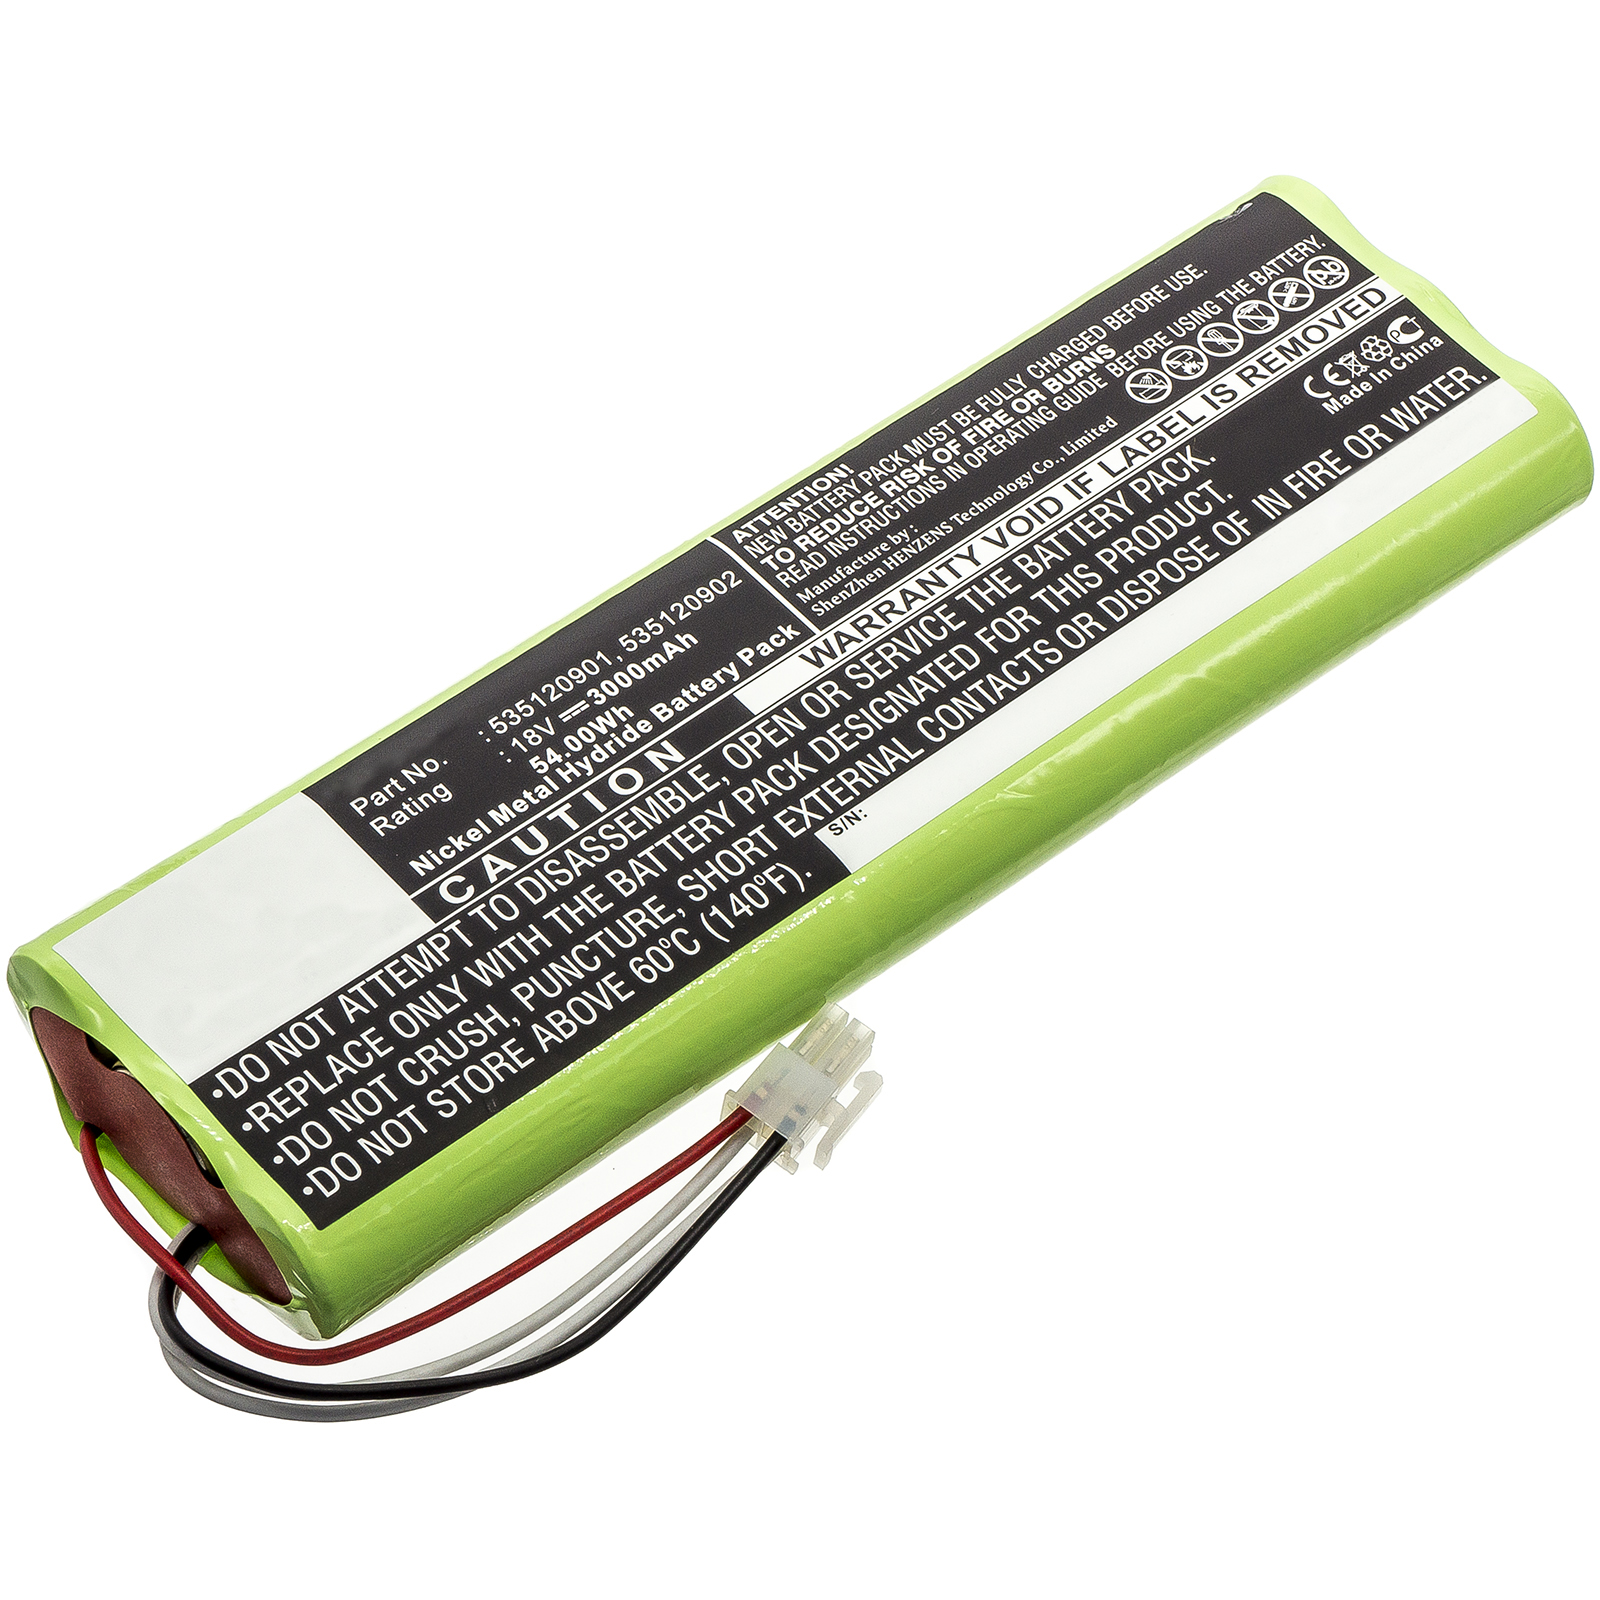 Synergy Digital Battery Compatible With Husqvarna 112862101 Lawn Mowers Battery - (Ni-MH, 18V, 3000 mAh)